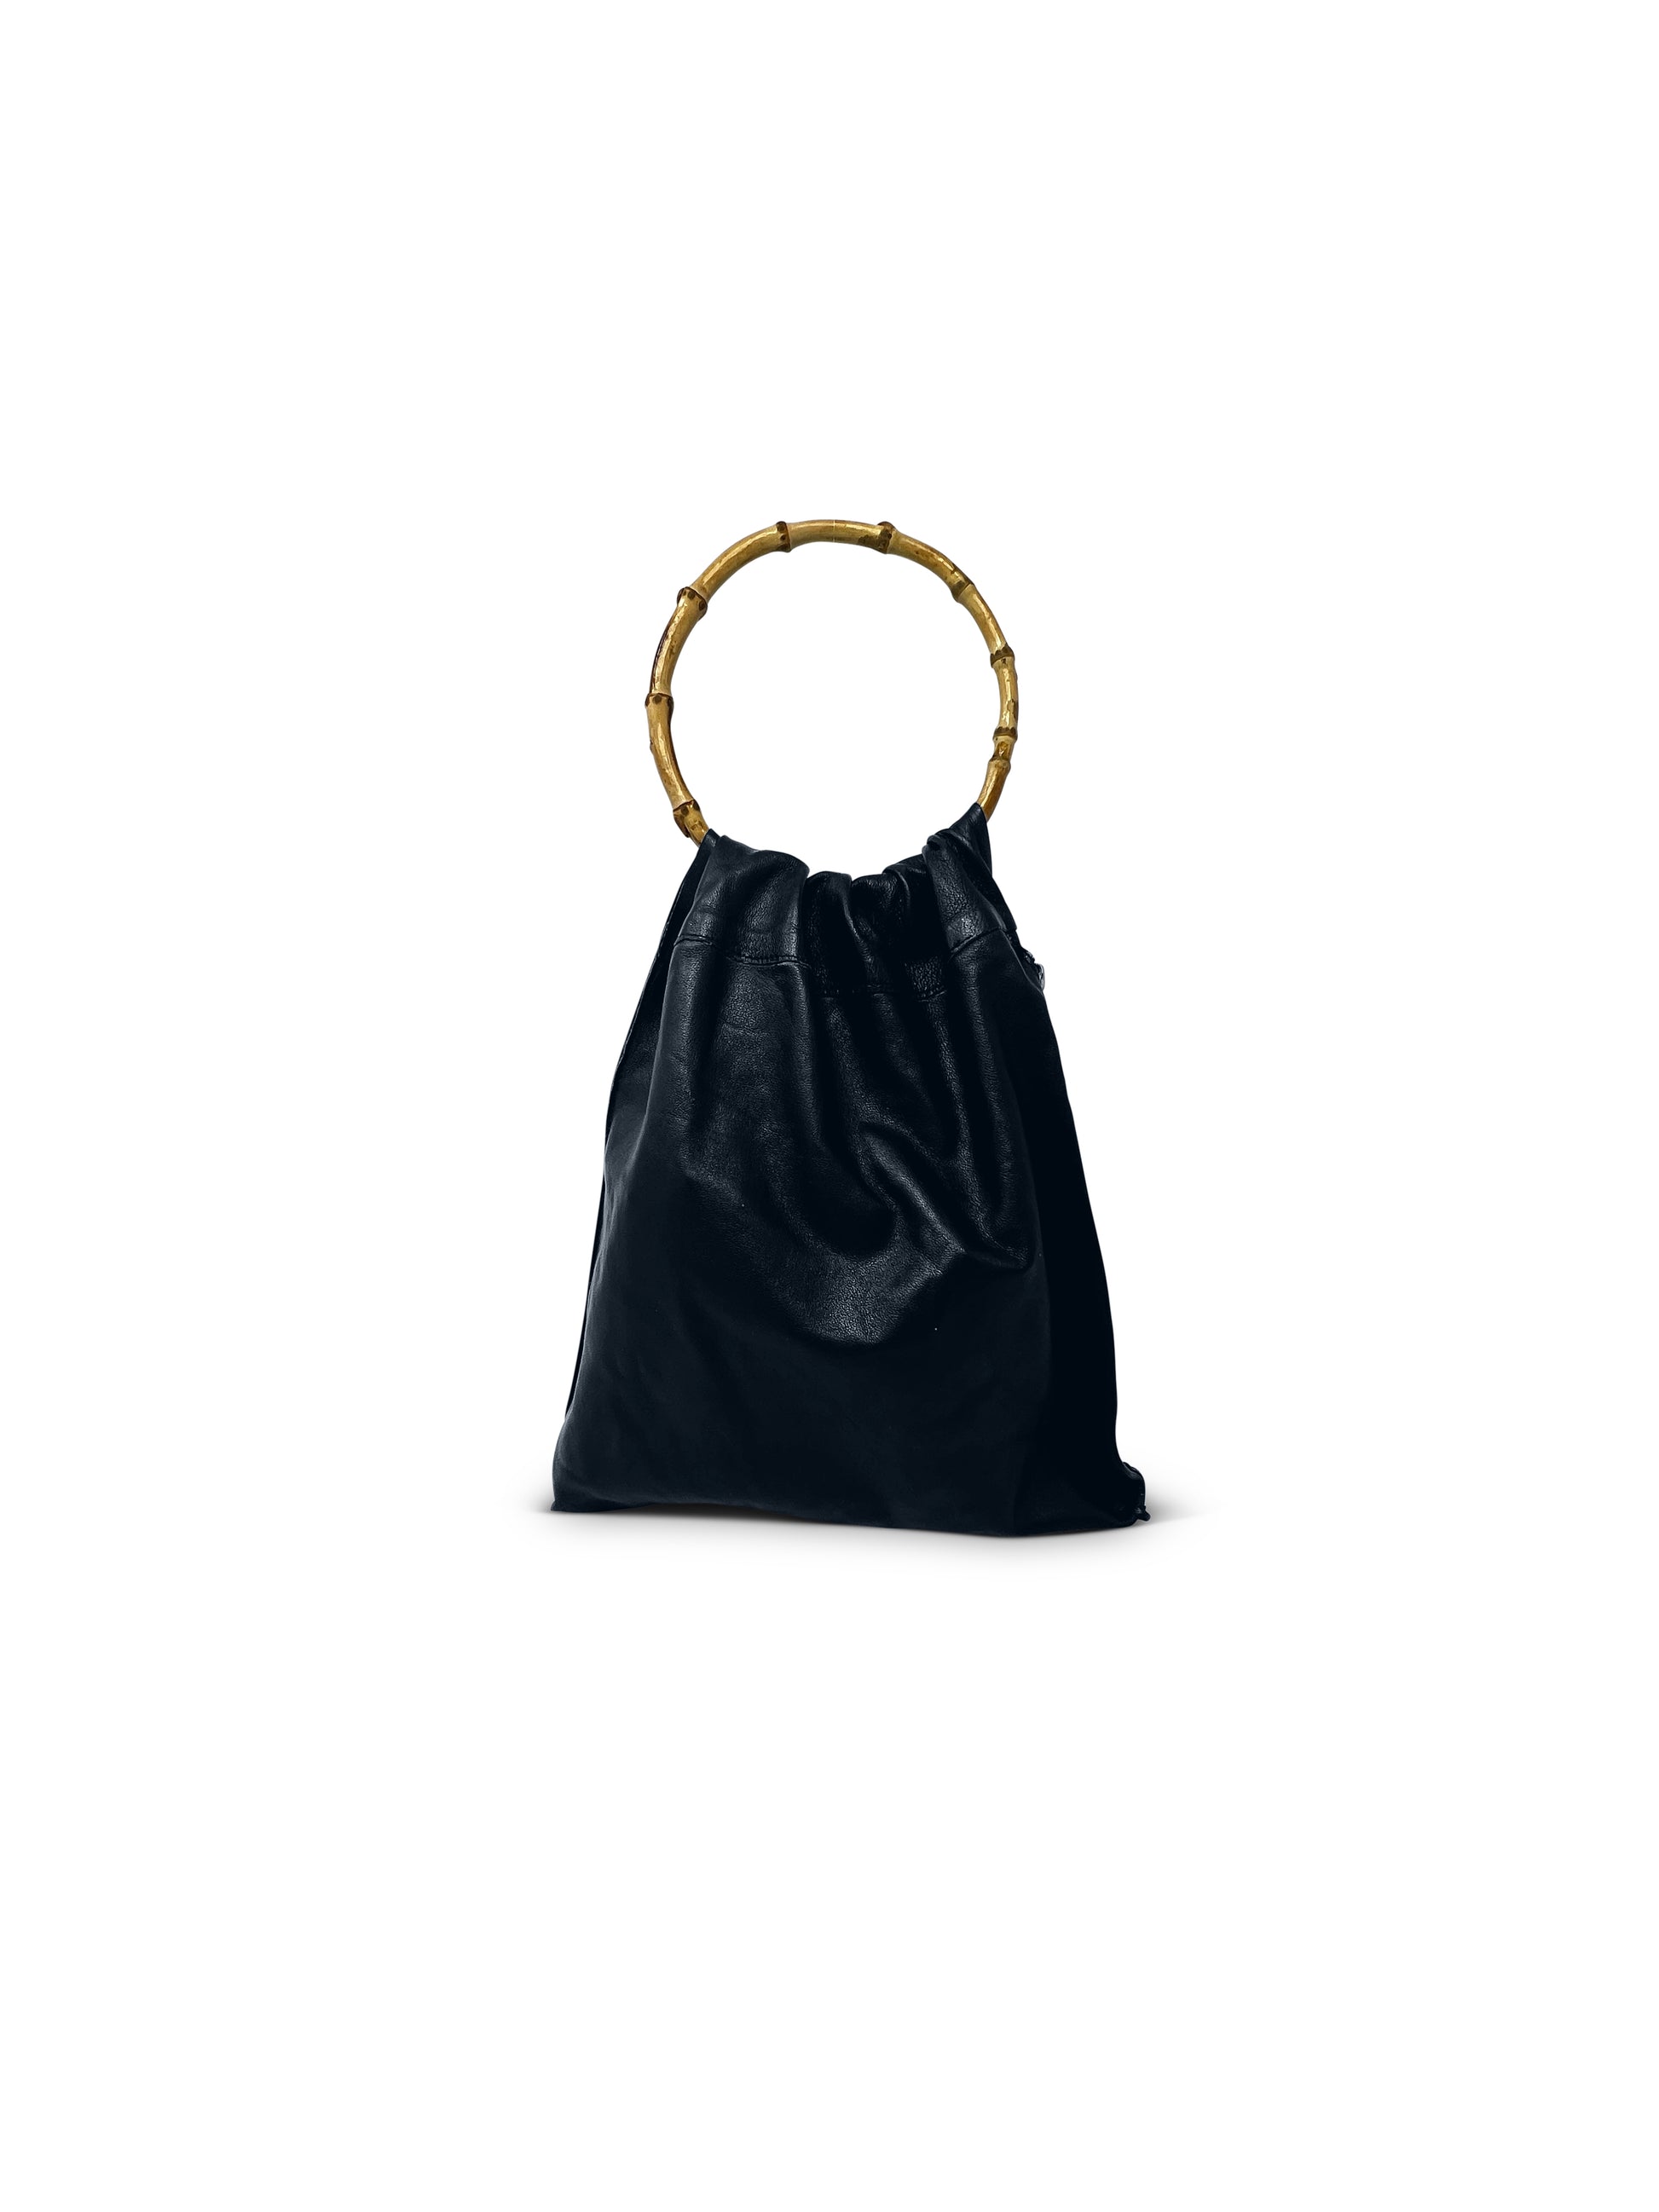 Black leather bag with a round natural bamboo handle with a side zipper. Made in Los Angeles